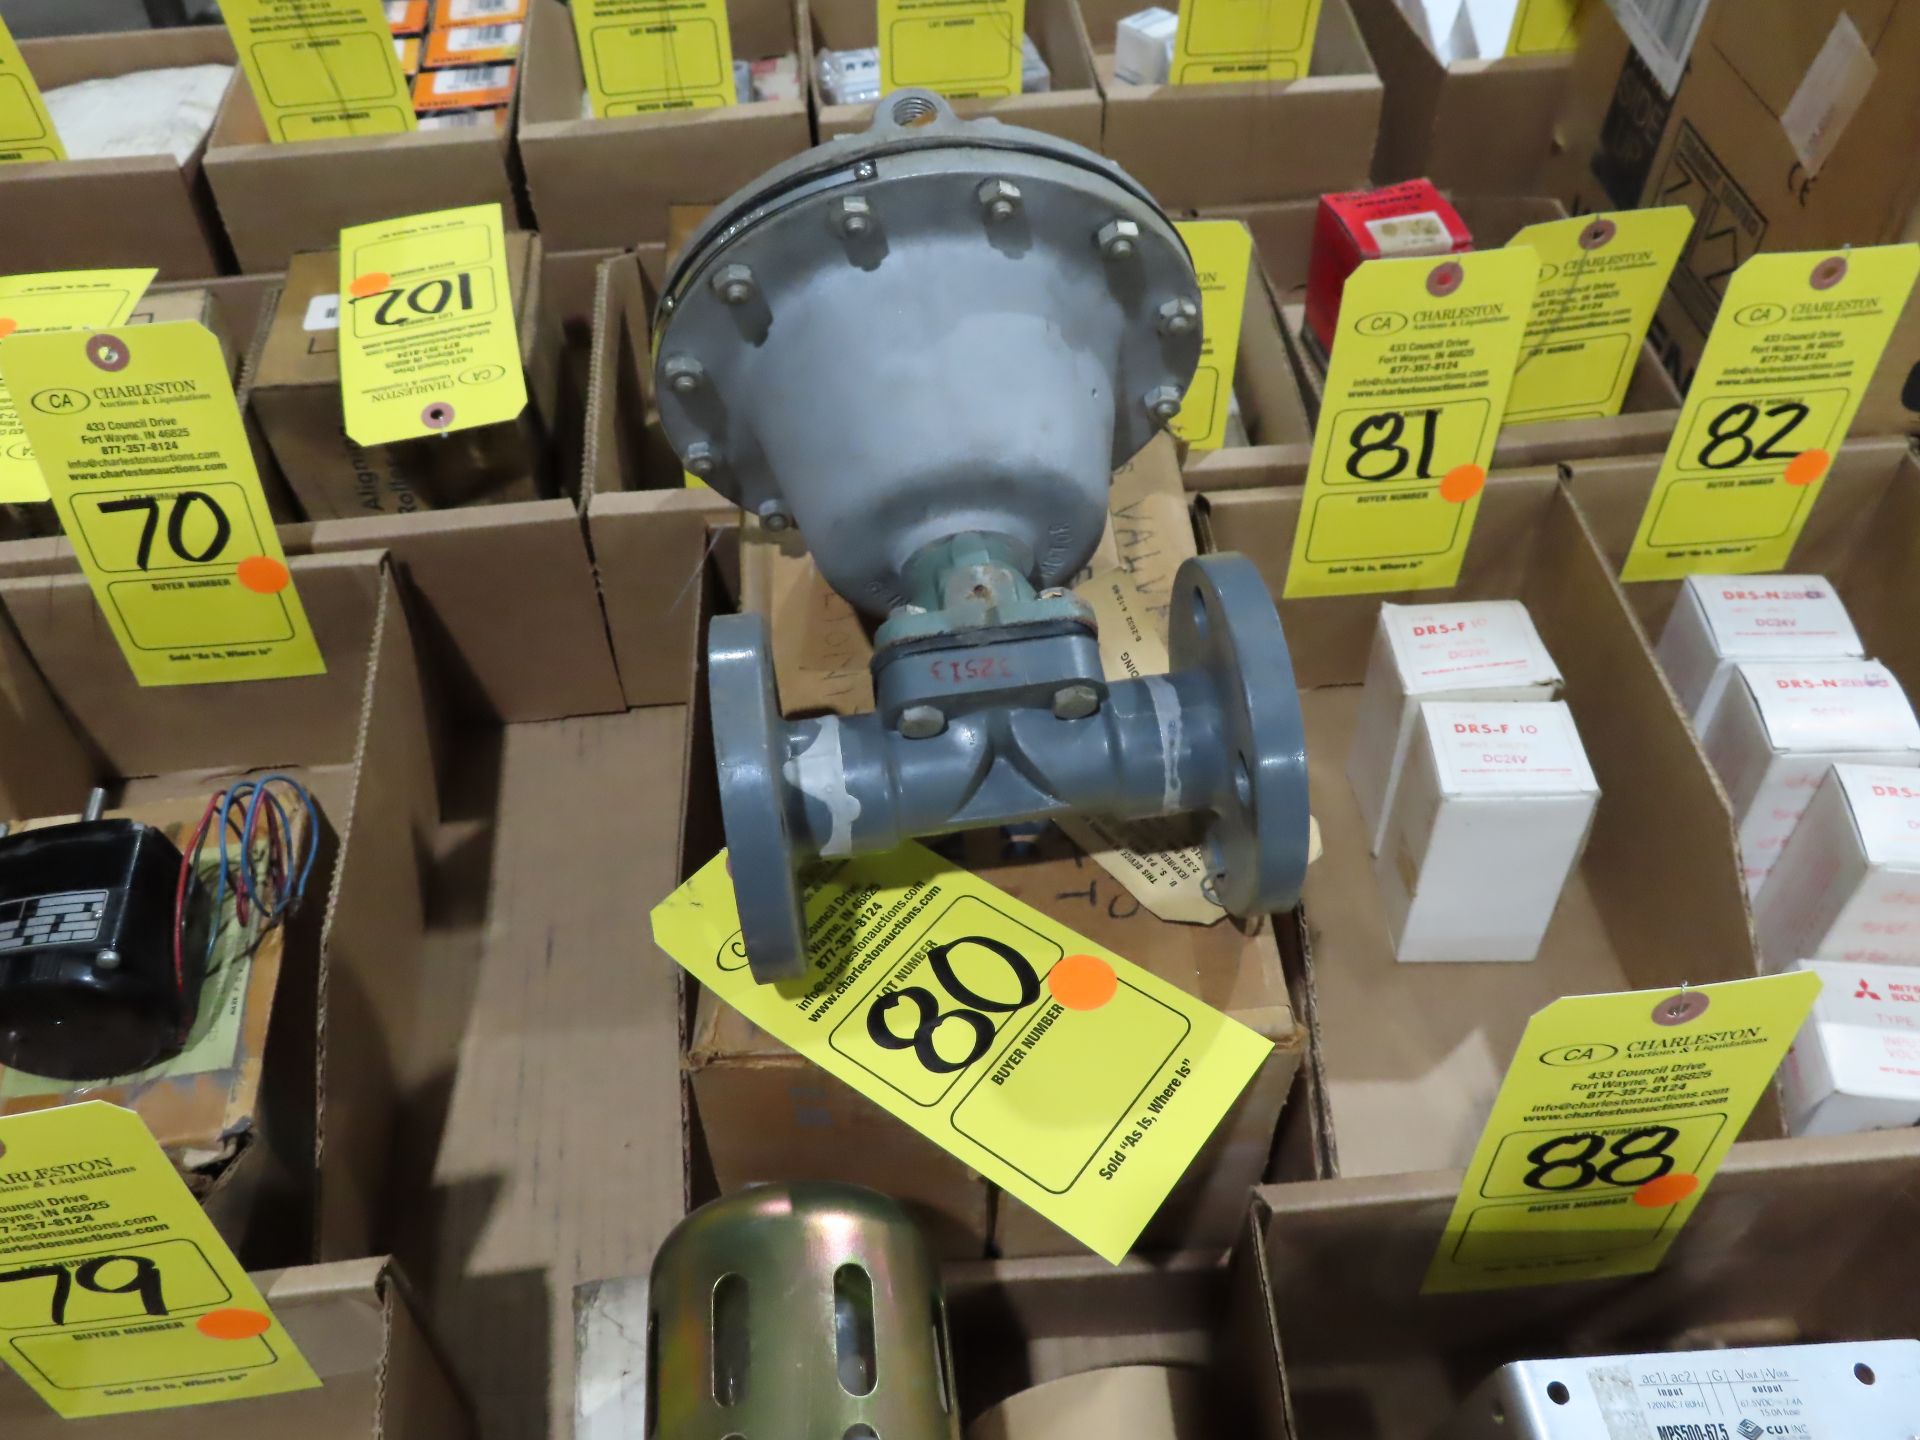 Grinnell Saunders valve model 3/4"-2436-31-T, new in box, as always with Brolyn LLC auctions, all